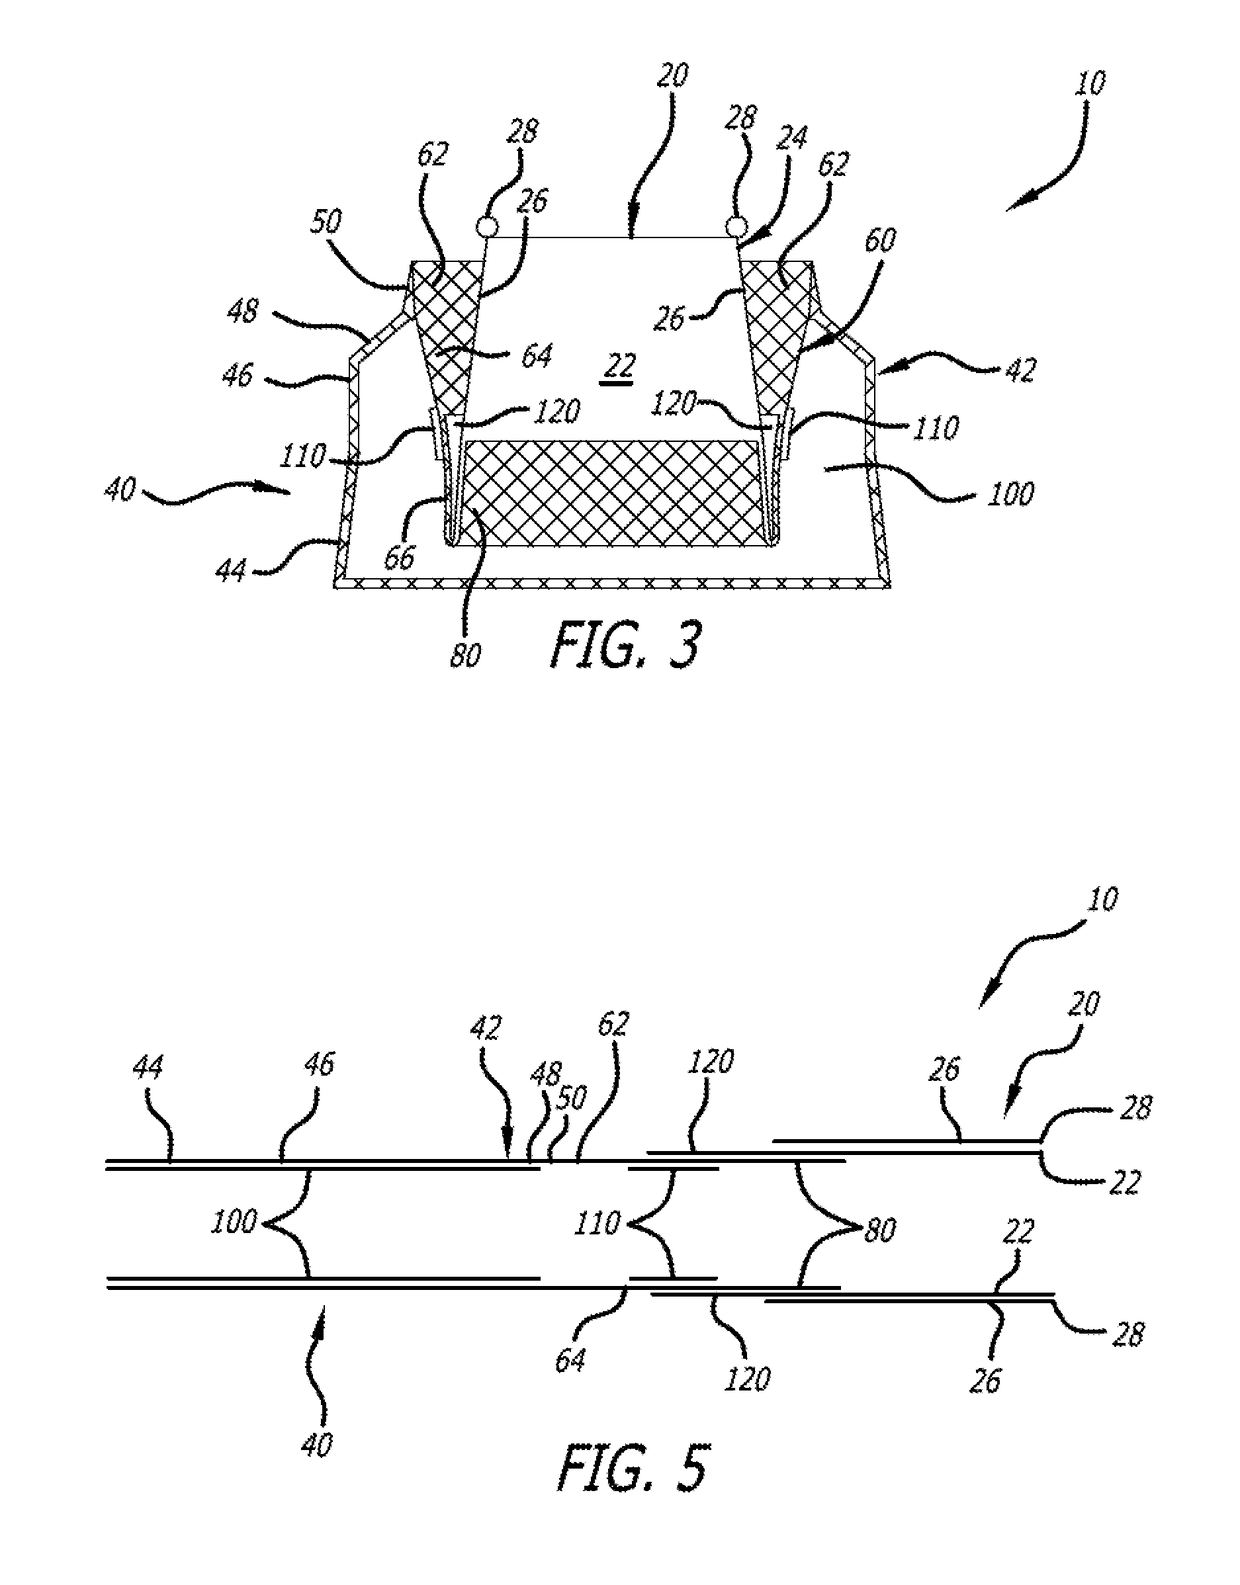 Valve sealing tissue and mesh structure